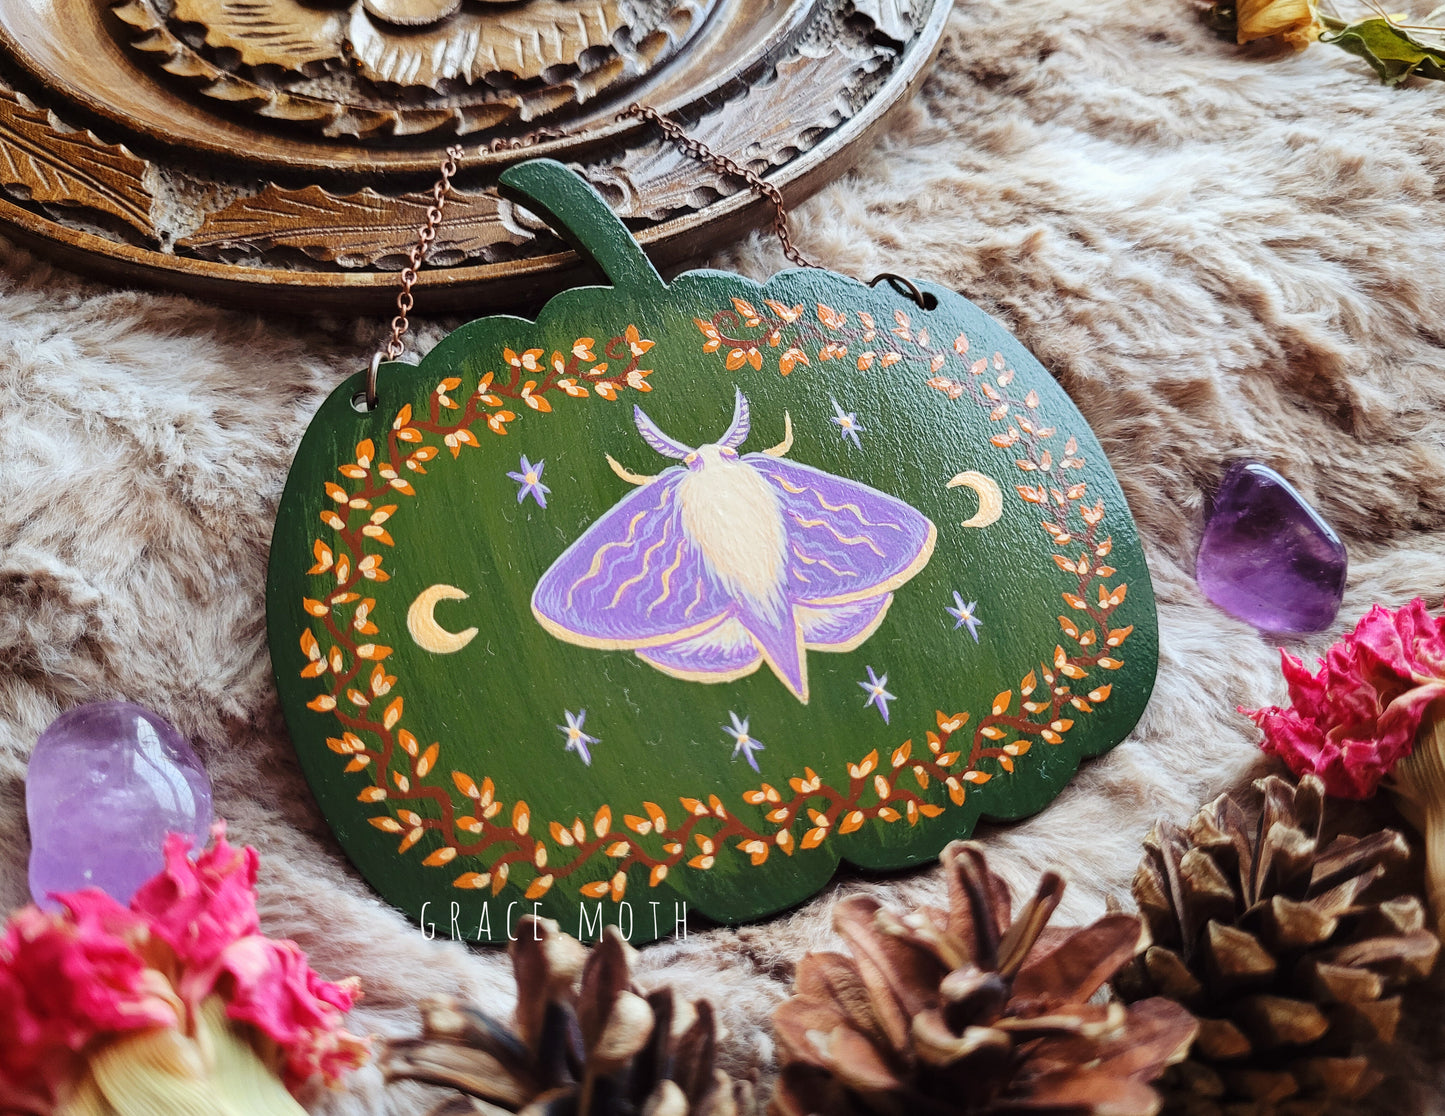 Original painted Magical Moth on Pumpkin - One of a kind handmade wall hanging/ornament by Grace Moth